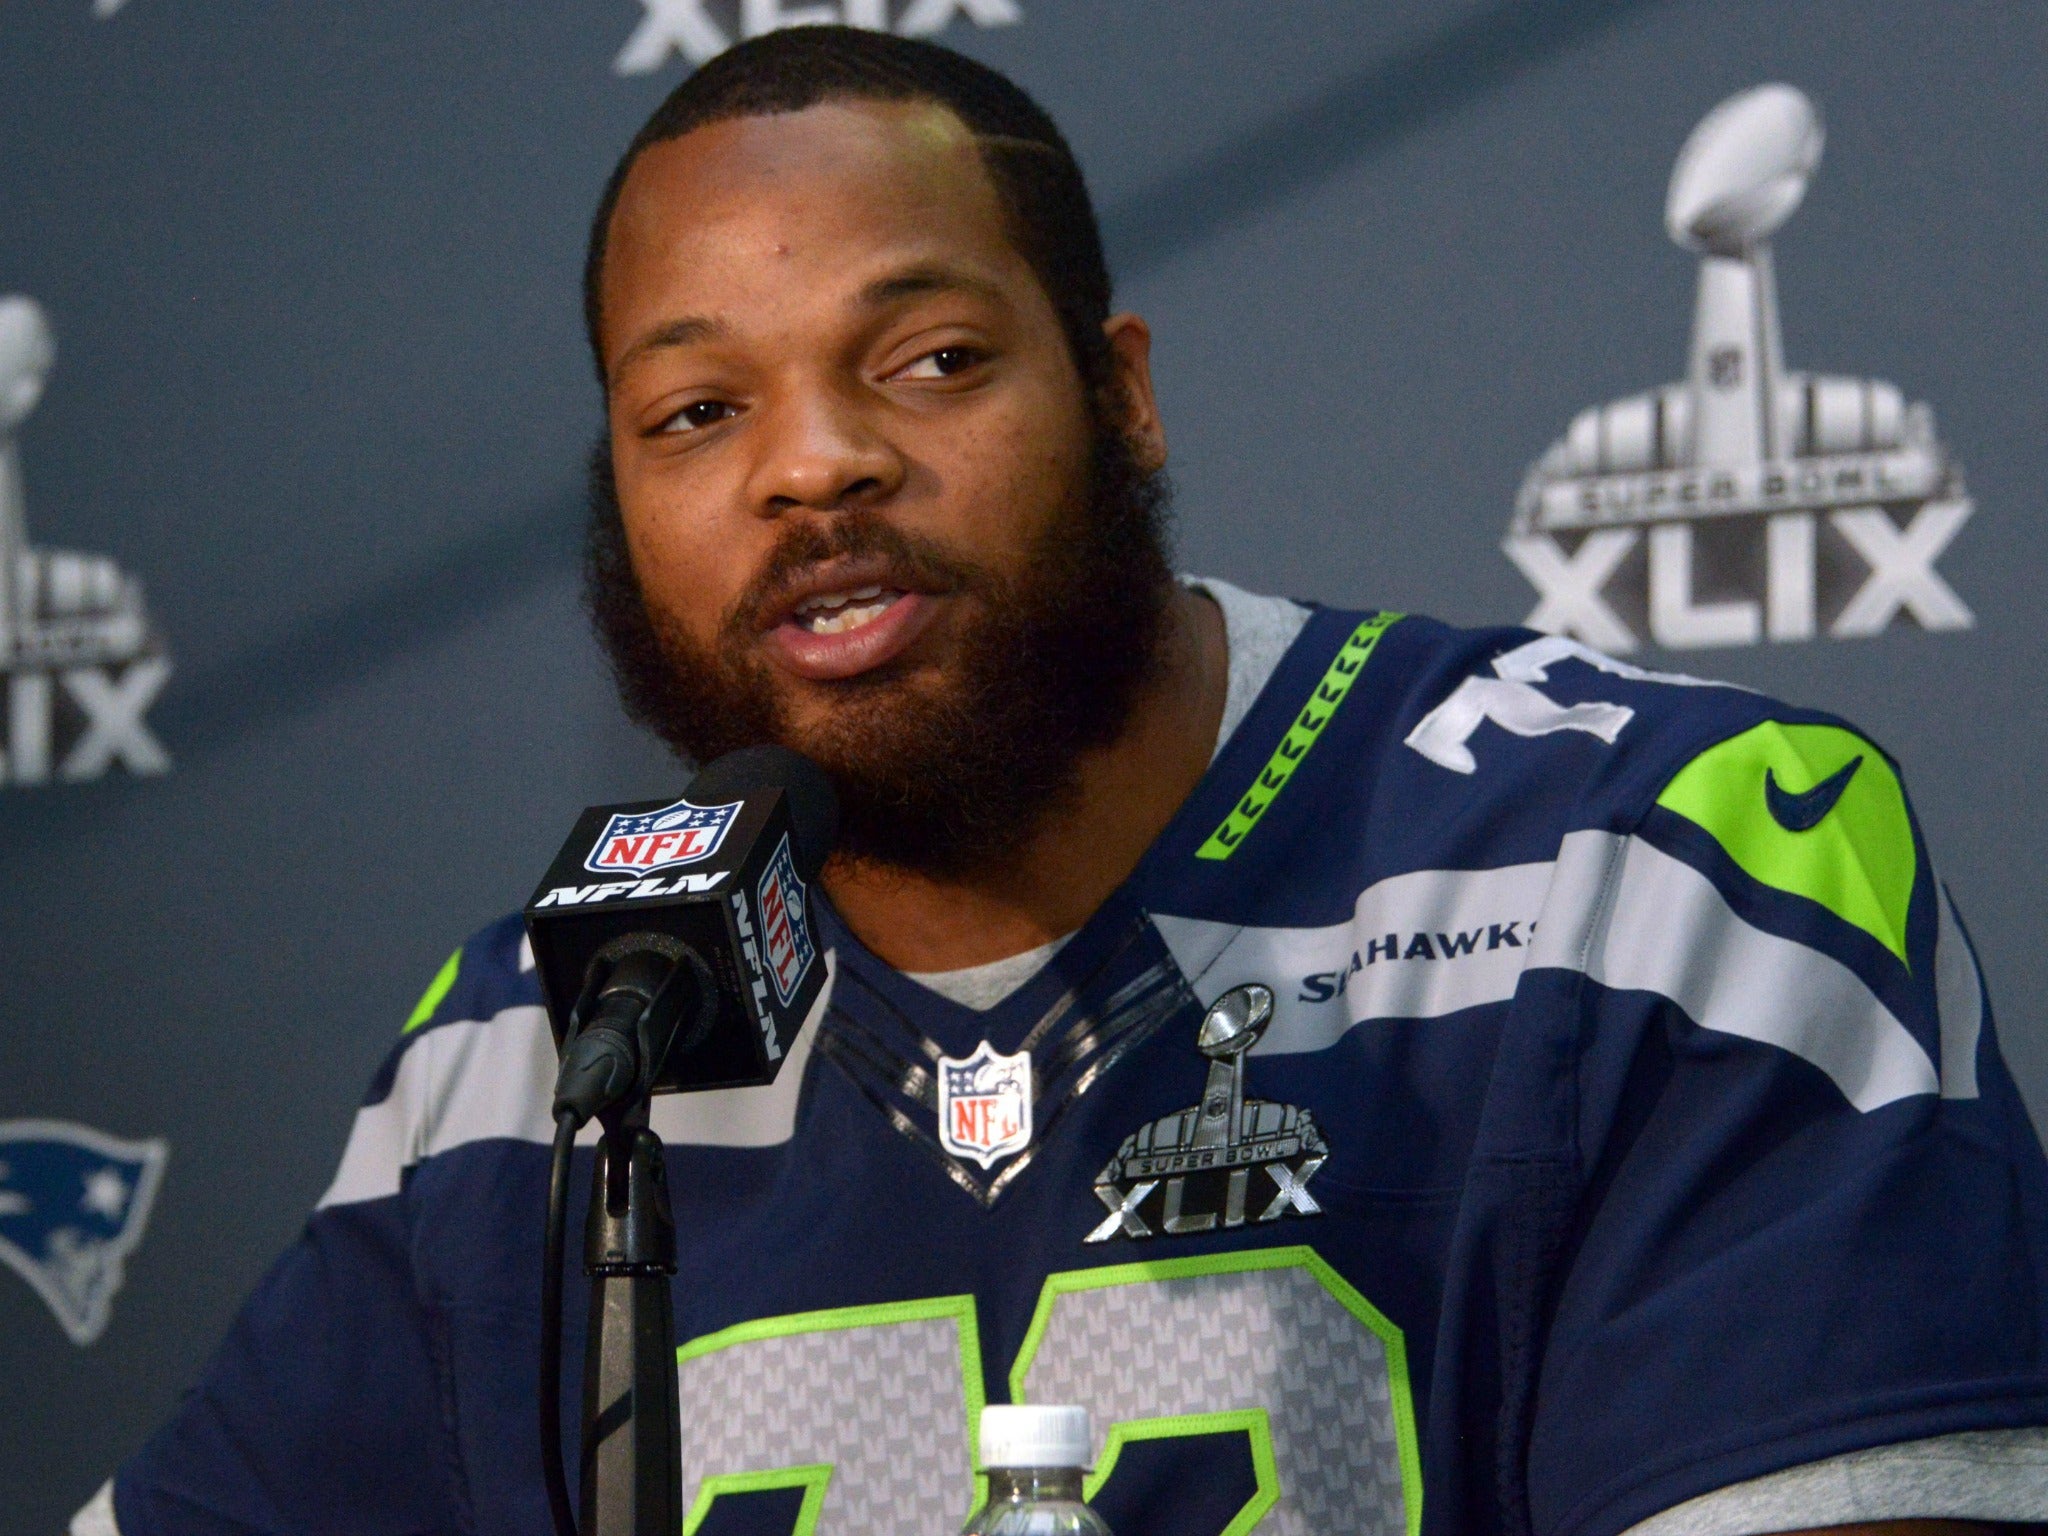 Seattle Seahawks defensive end Michael Bennett, seen here during a Jan 29, 2015 press conference, contends he was mistreated by the Las Vegas police.